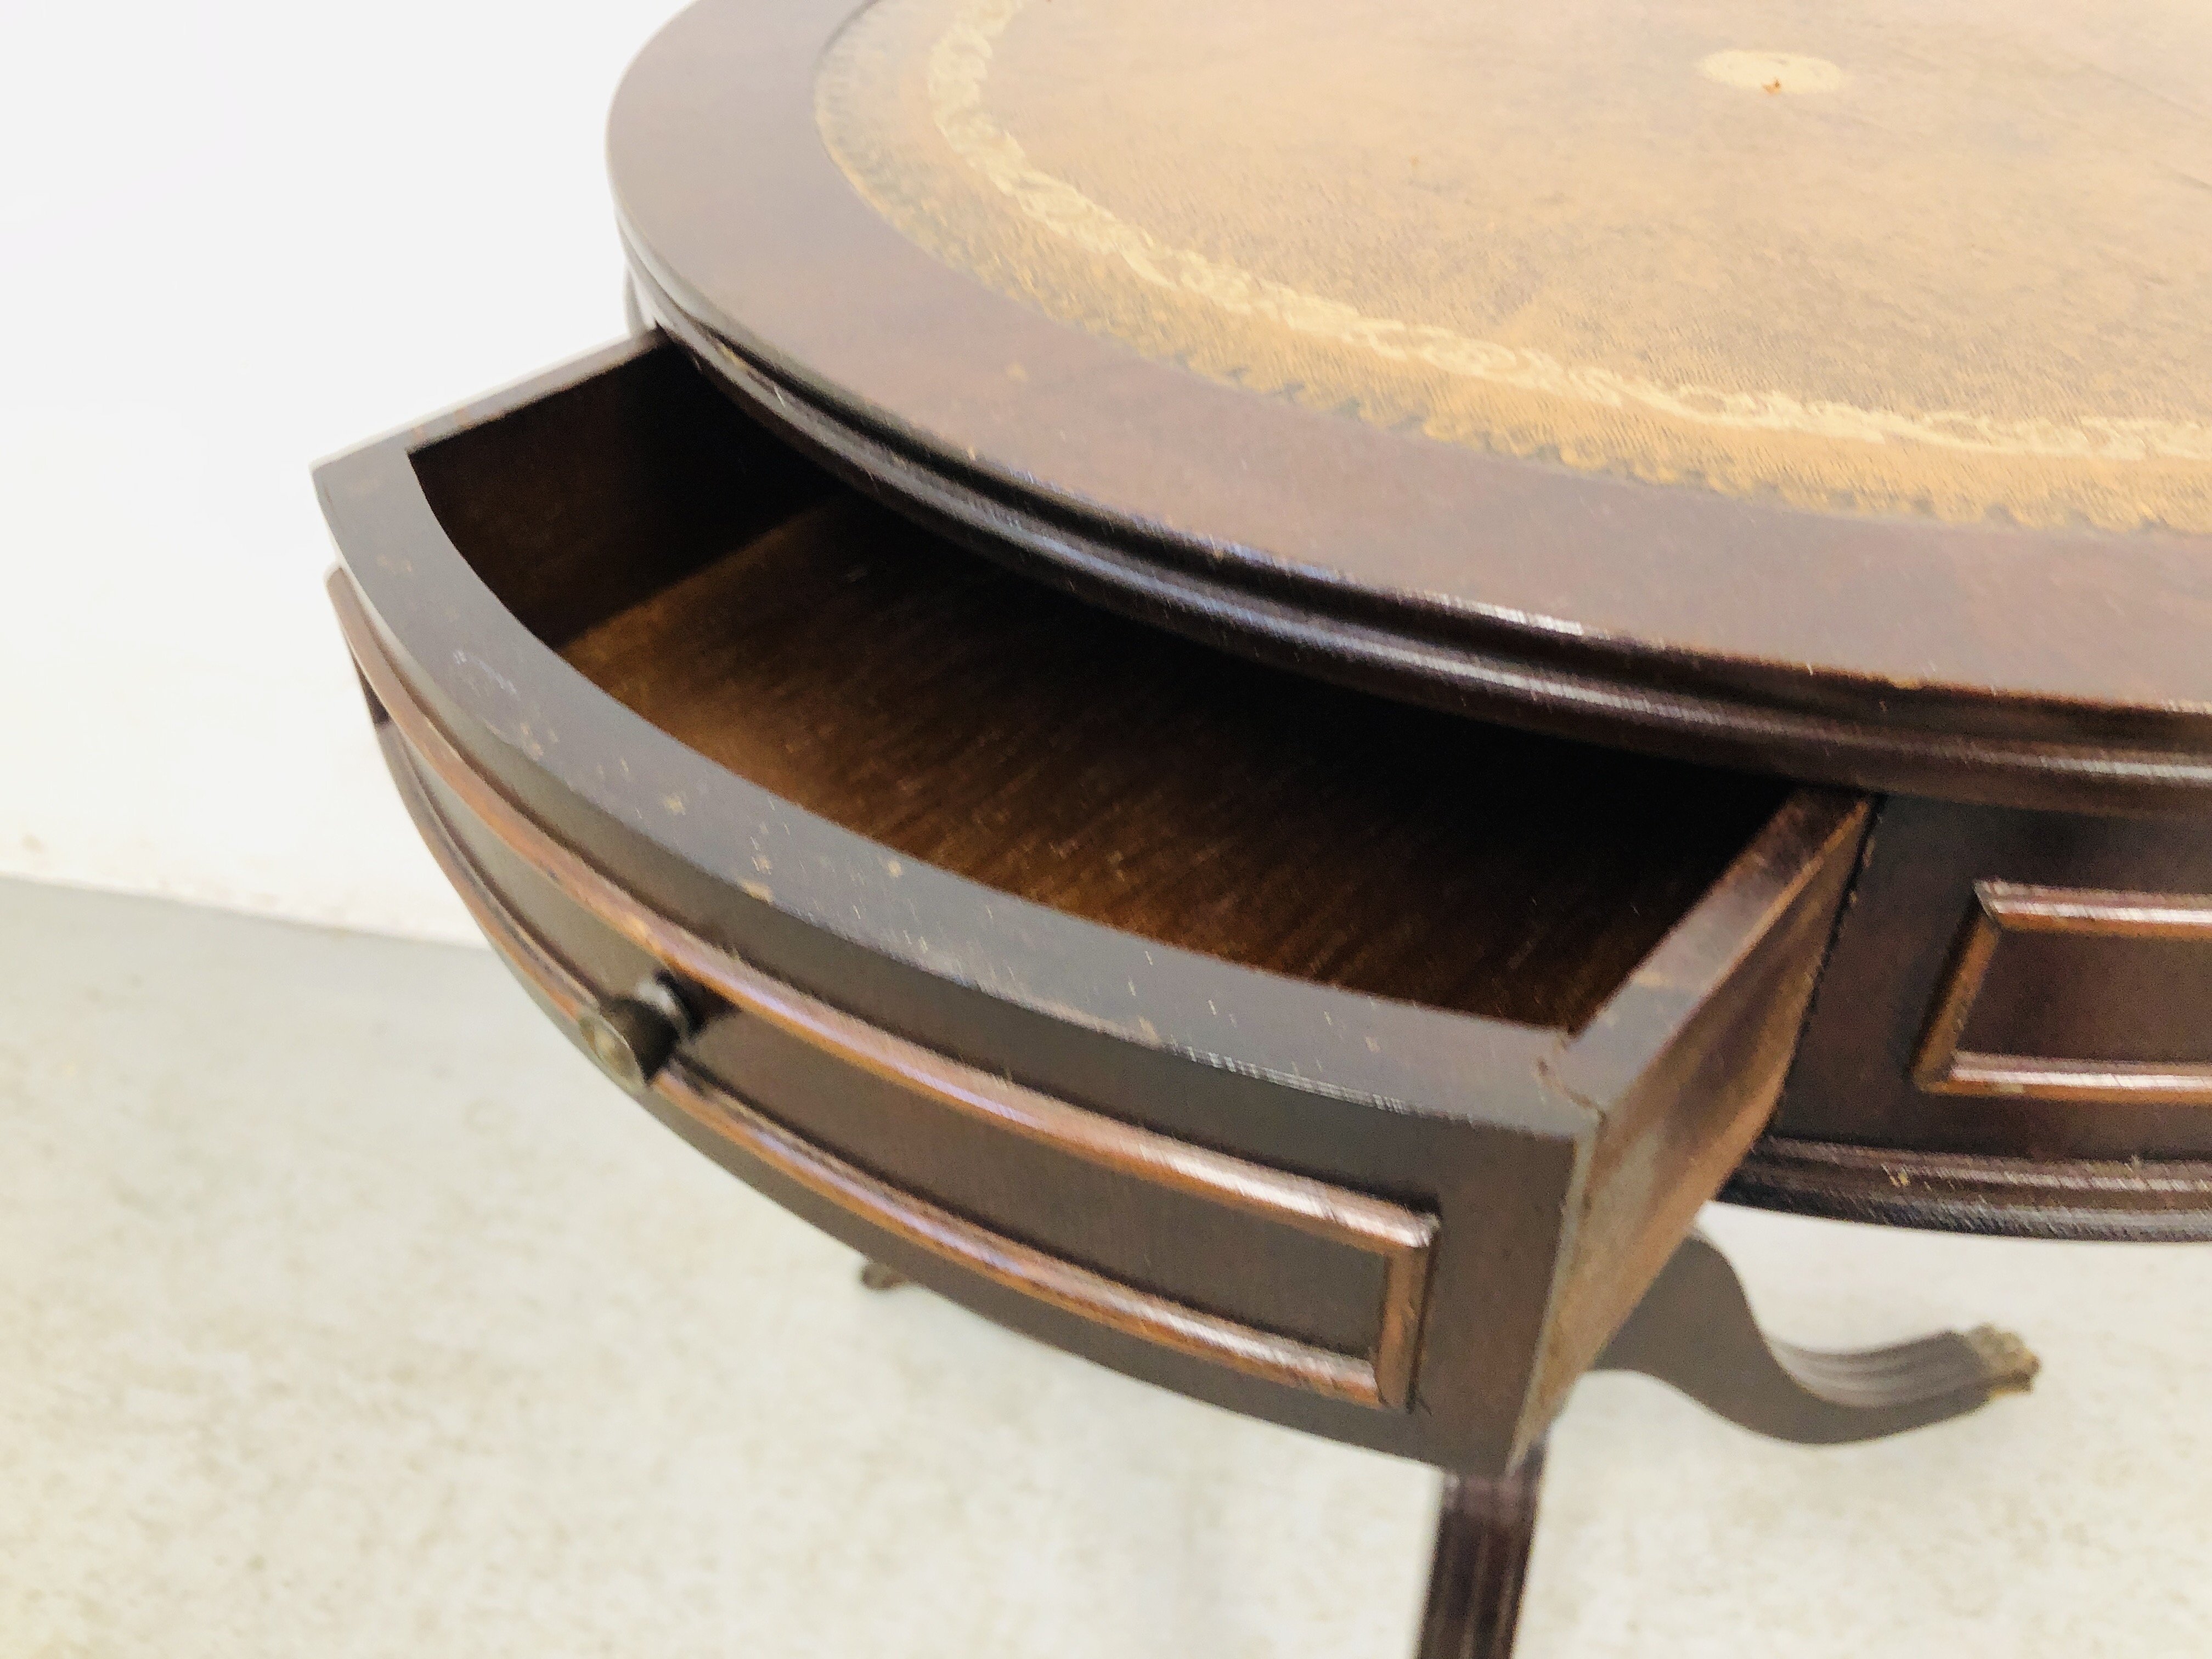 REPRODUCTION SINGLE PEDESTAL DRUM TABLE WITH TOOLED LEATHER TOP - Image 7 of 7